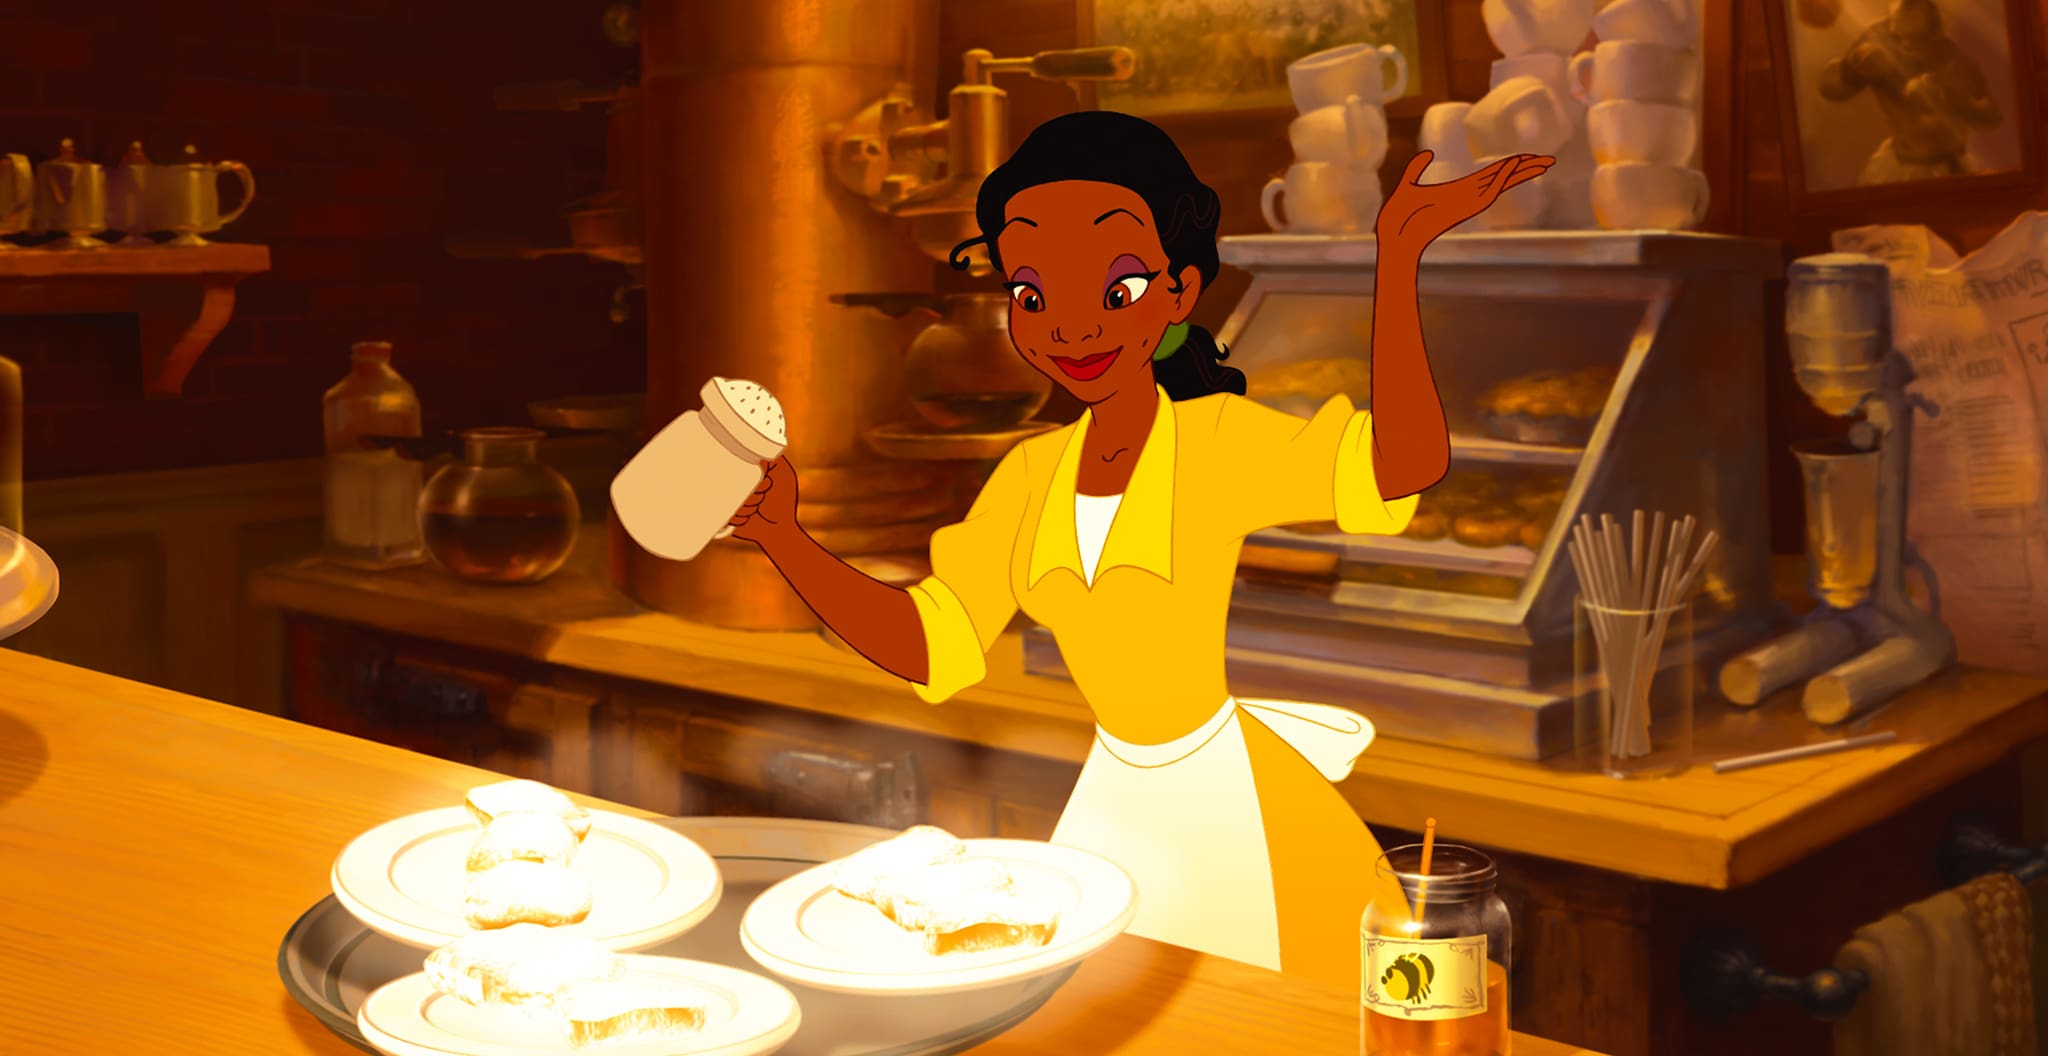 Tiana holds a shaker as she stands in front of a tray of food.